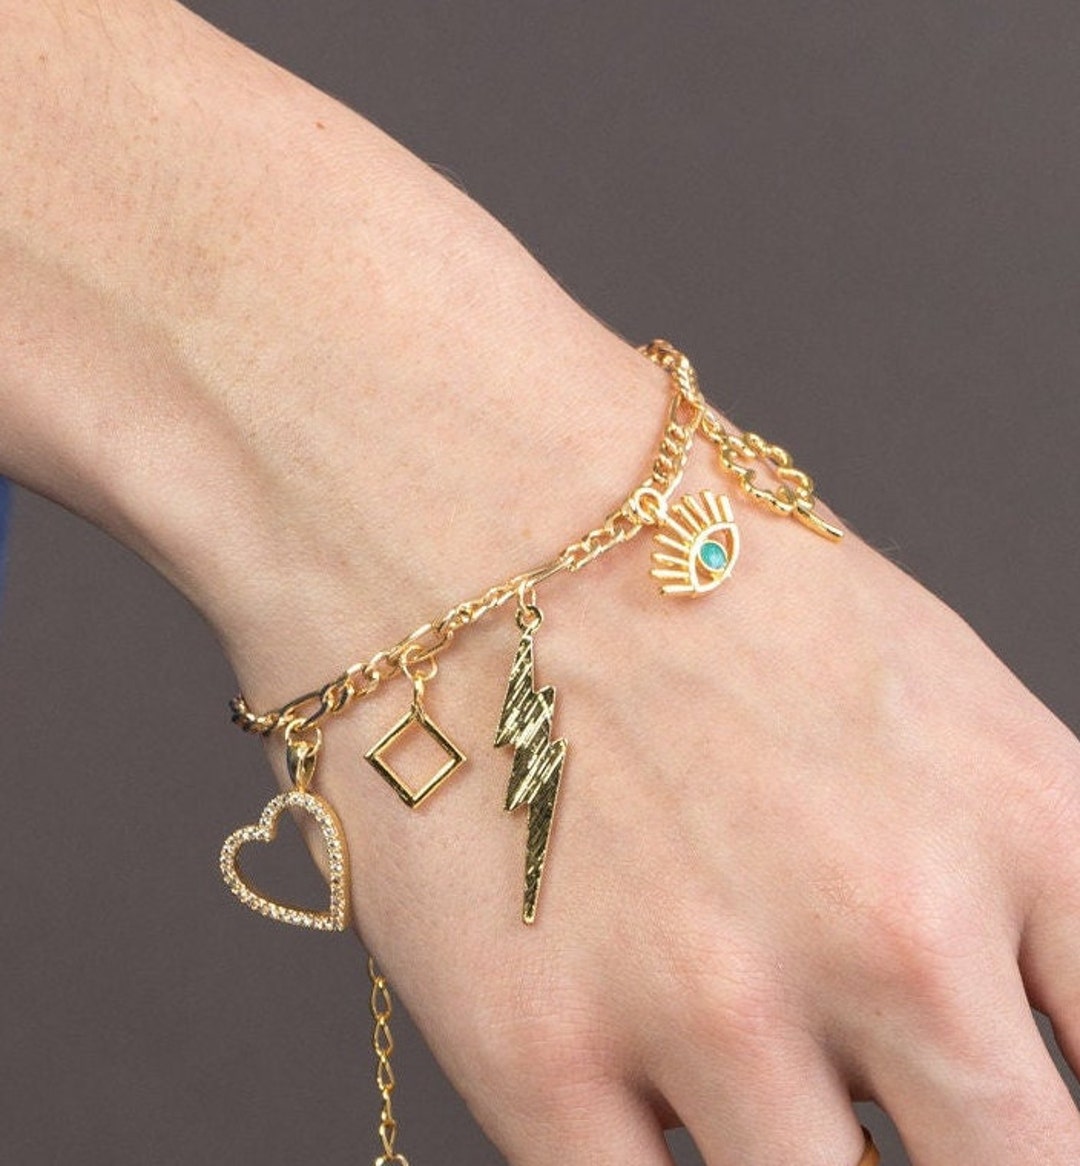 Create Your own Charm Bracelet, The perfect Gift